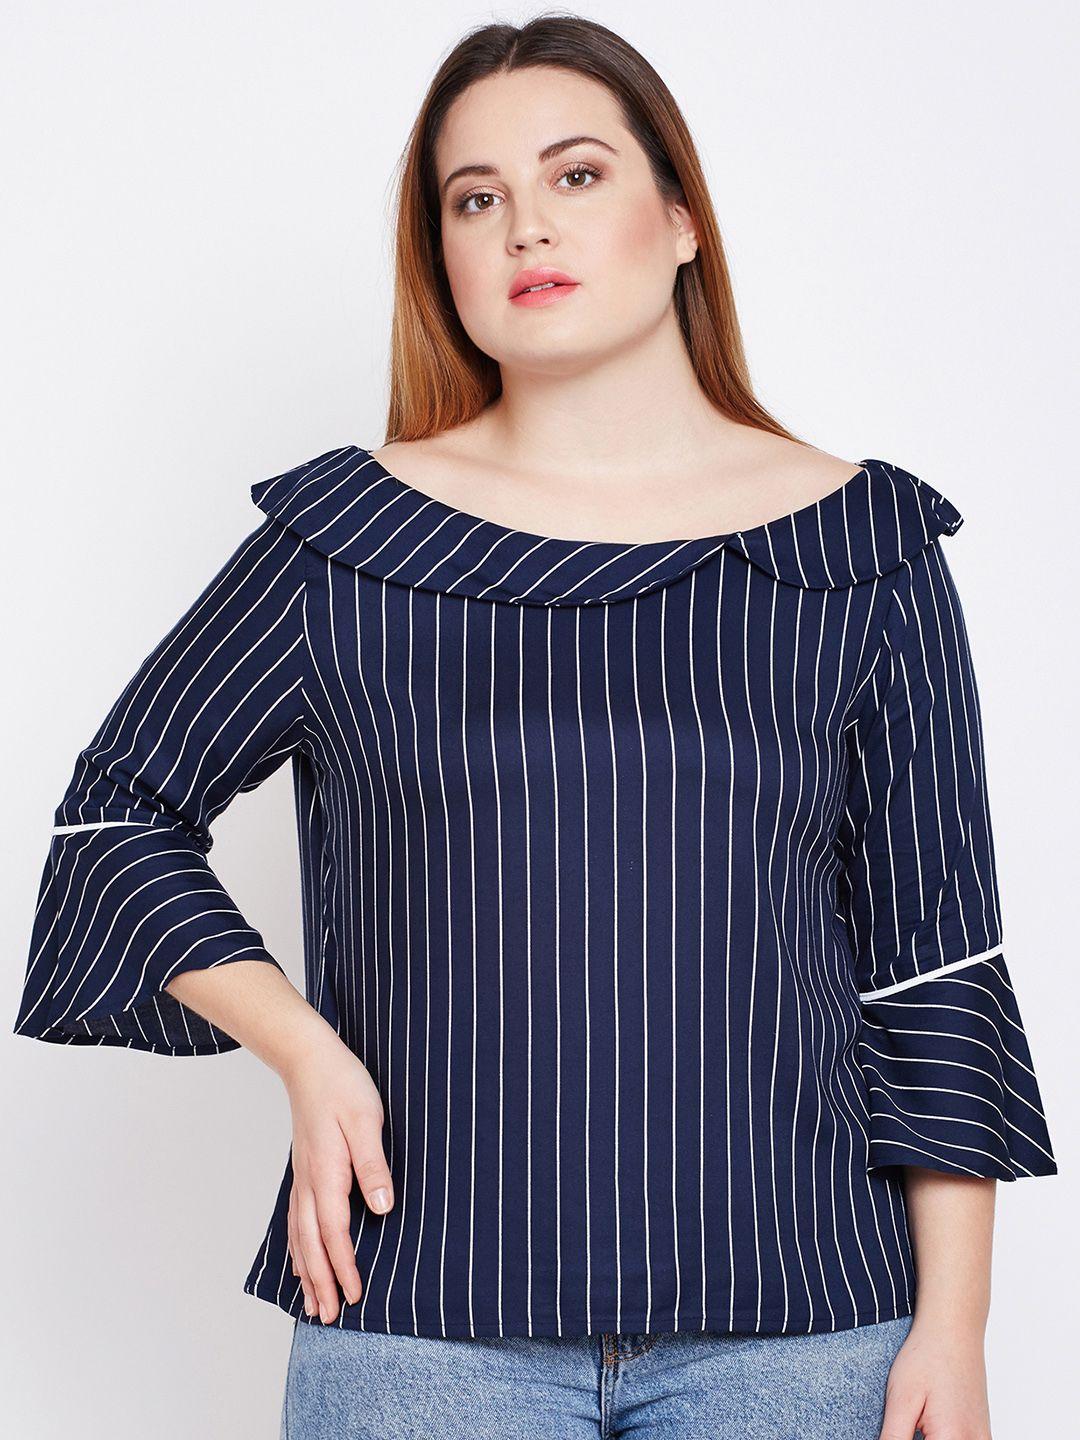 style-quotient-women-navy-blue-striped-top